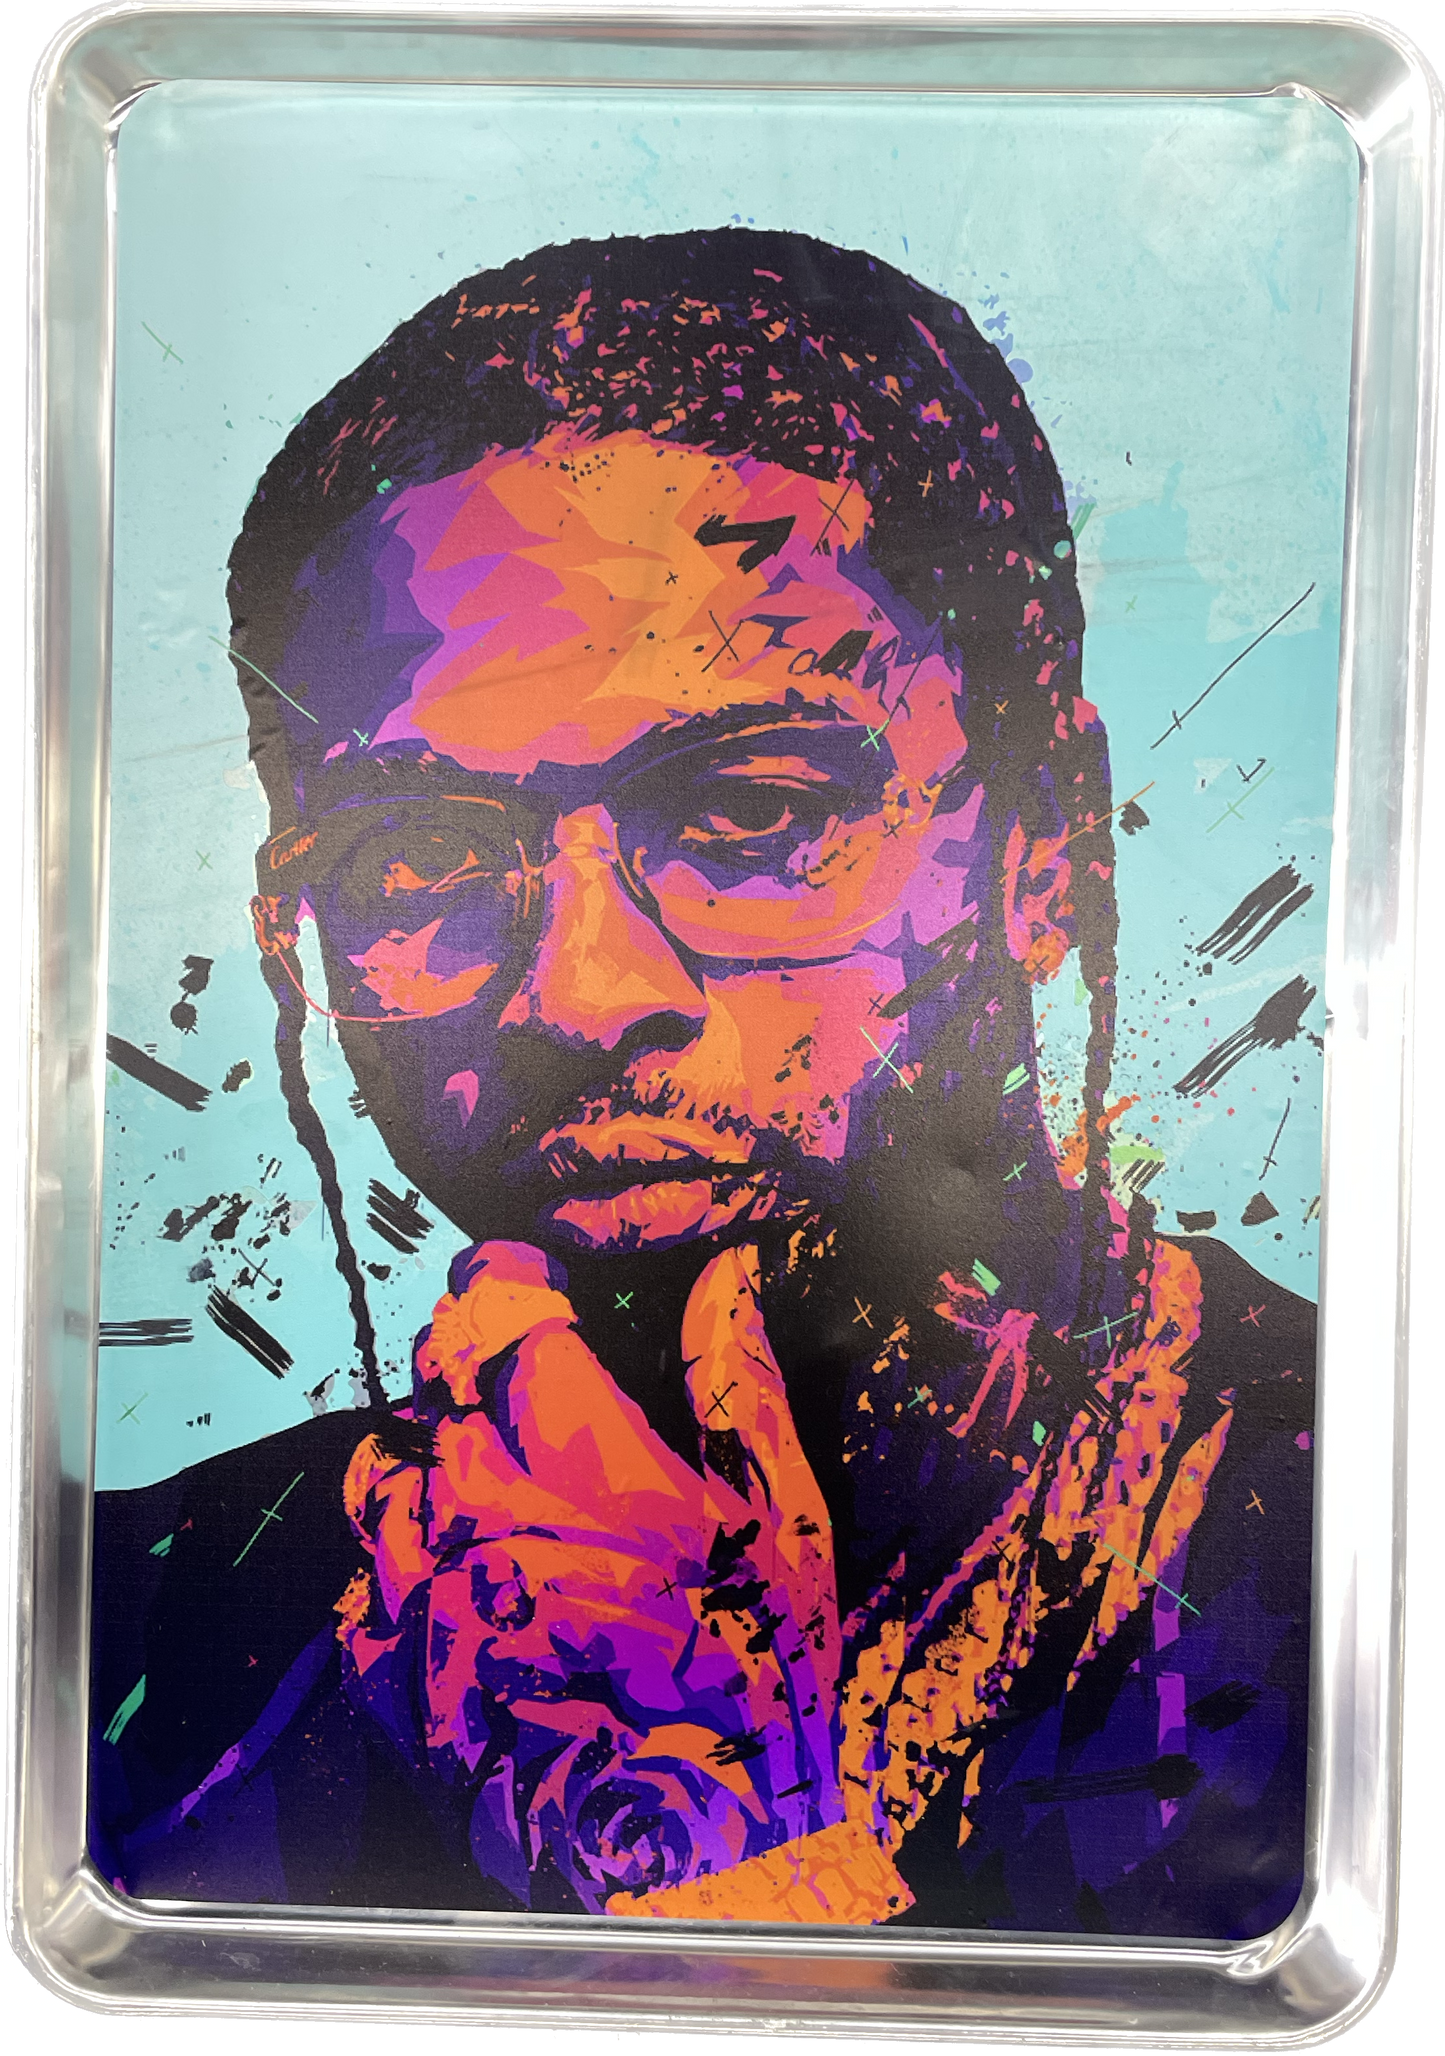 The Sticker Cartel Holographic Design Metal Tray - 26" x 18"